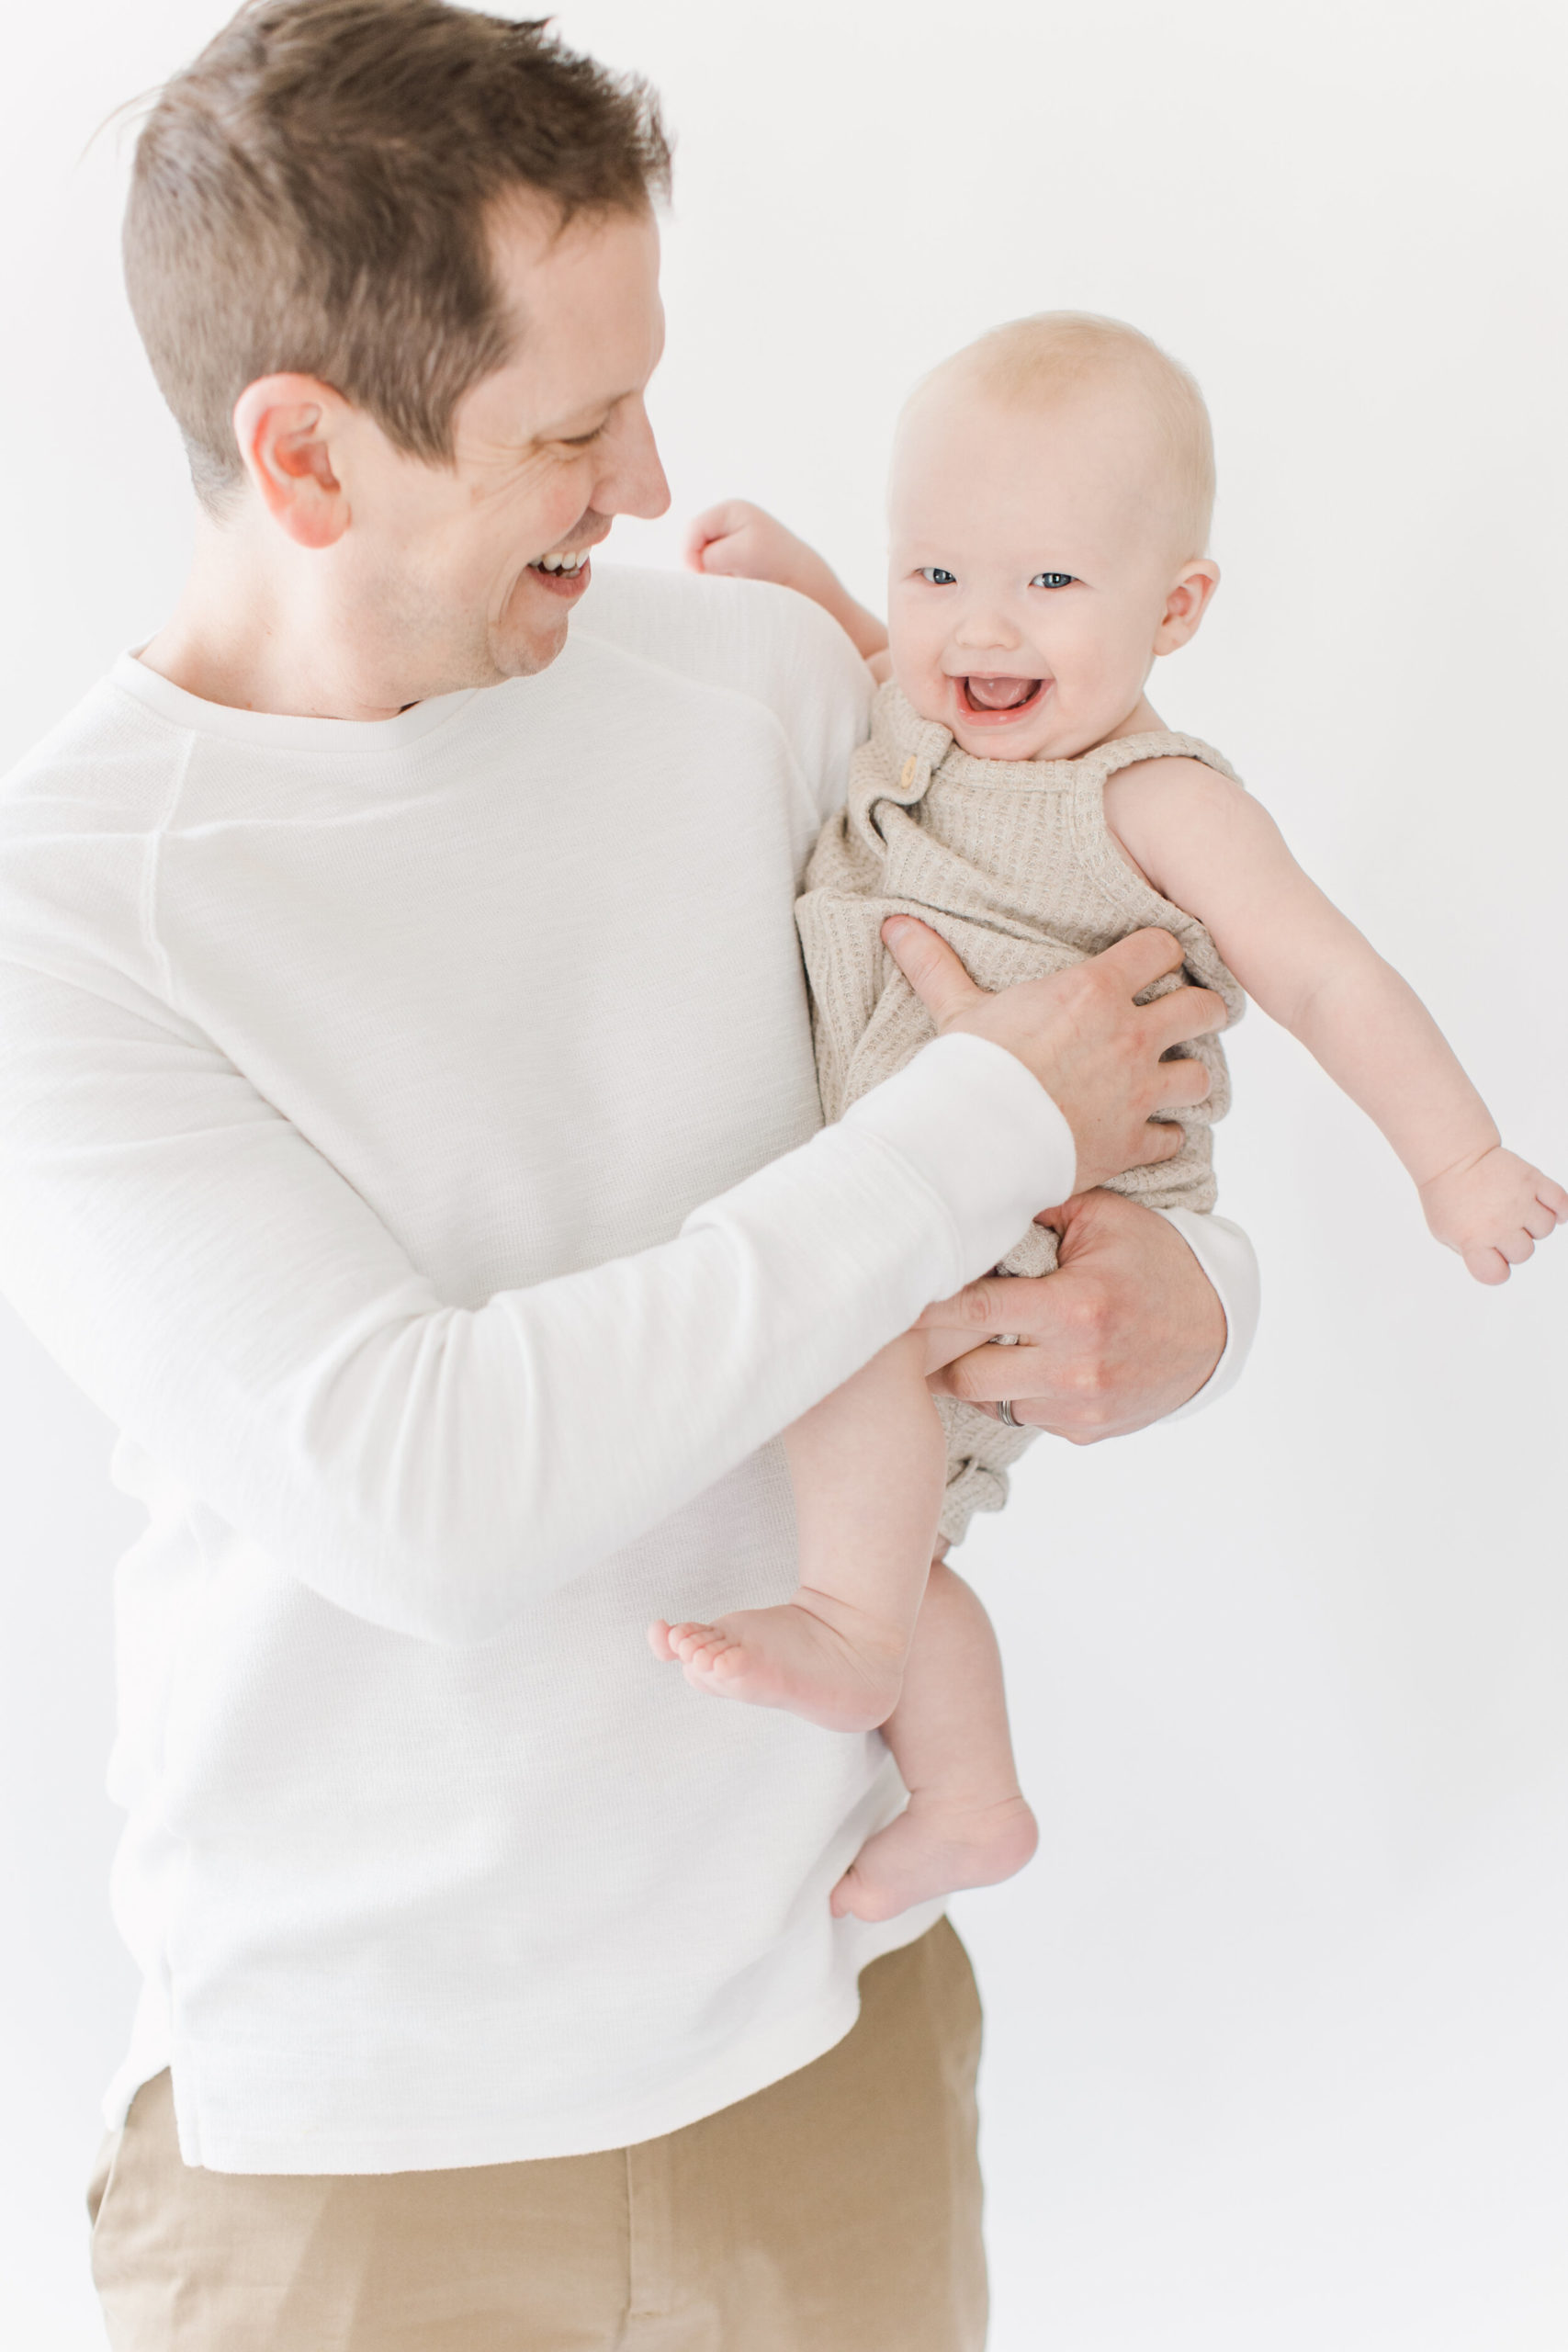 Baby boy with dad during 6 month photo shoot